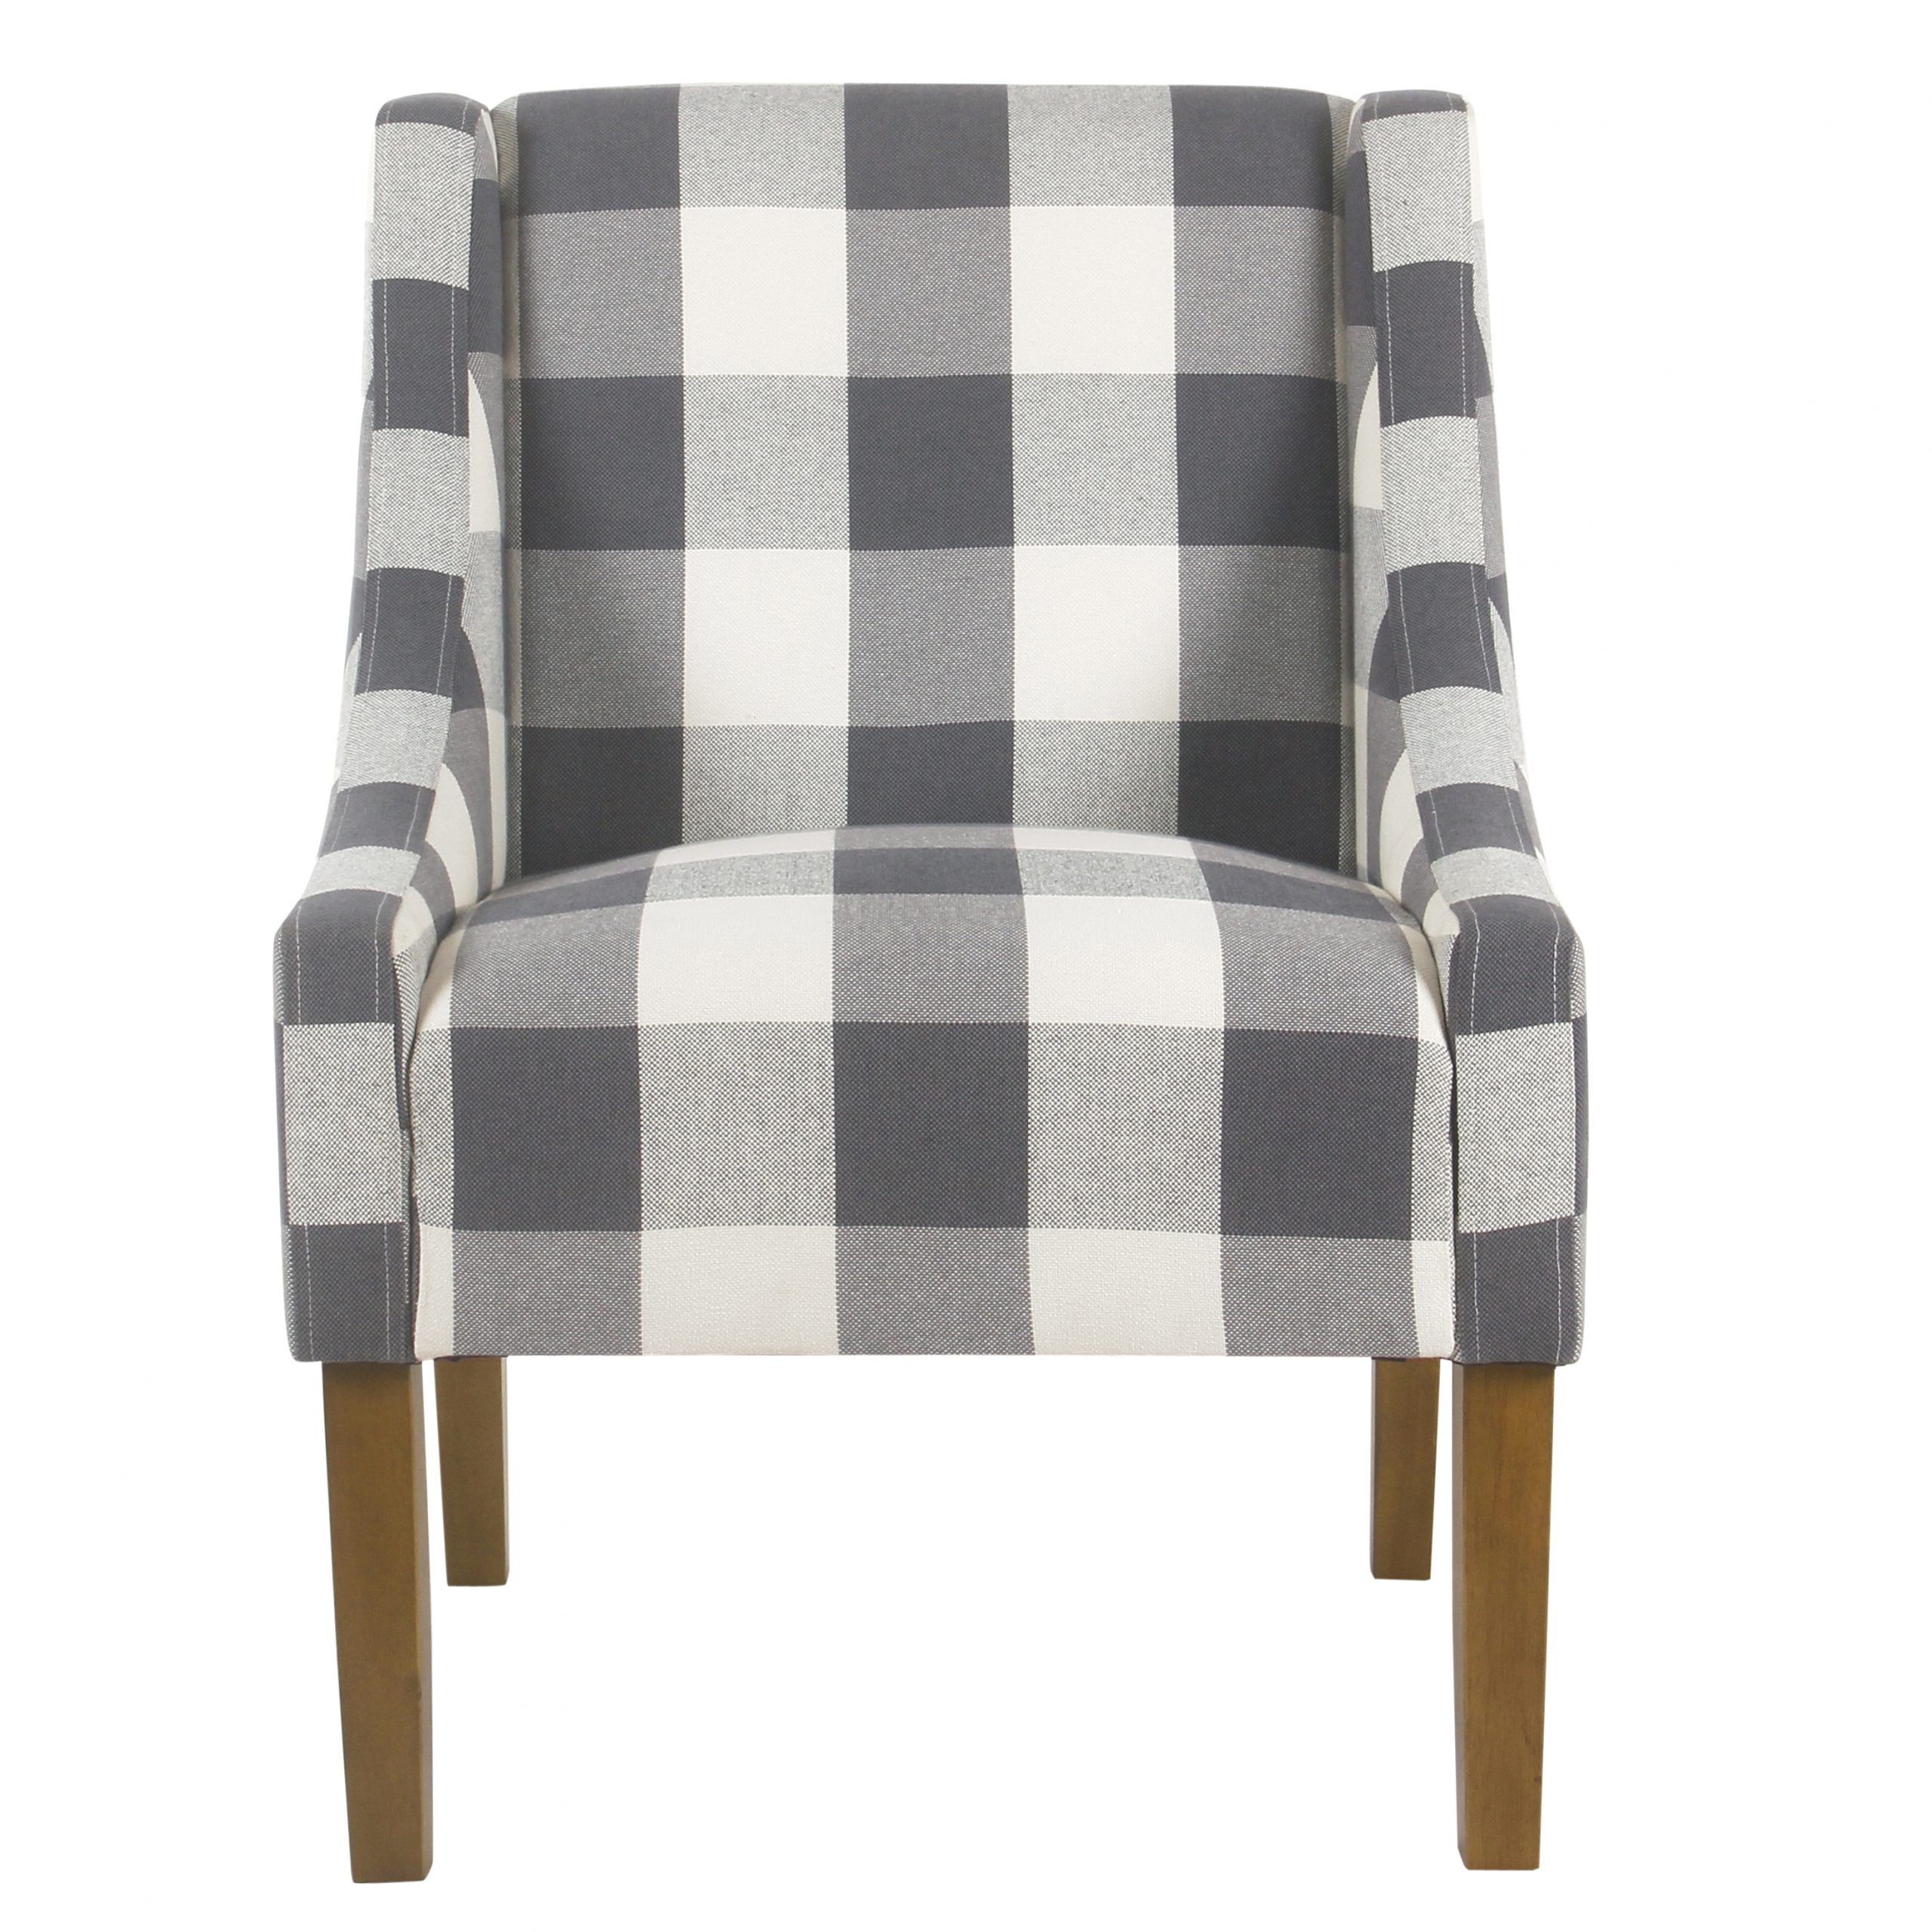 Homepop Modern Swoop Accent Chair, Gray Plaid – Walmart – Walmart Pertaining To Satin Gray Wood Accent Stools (Gallery 20 of 20)